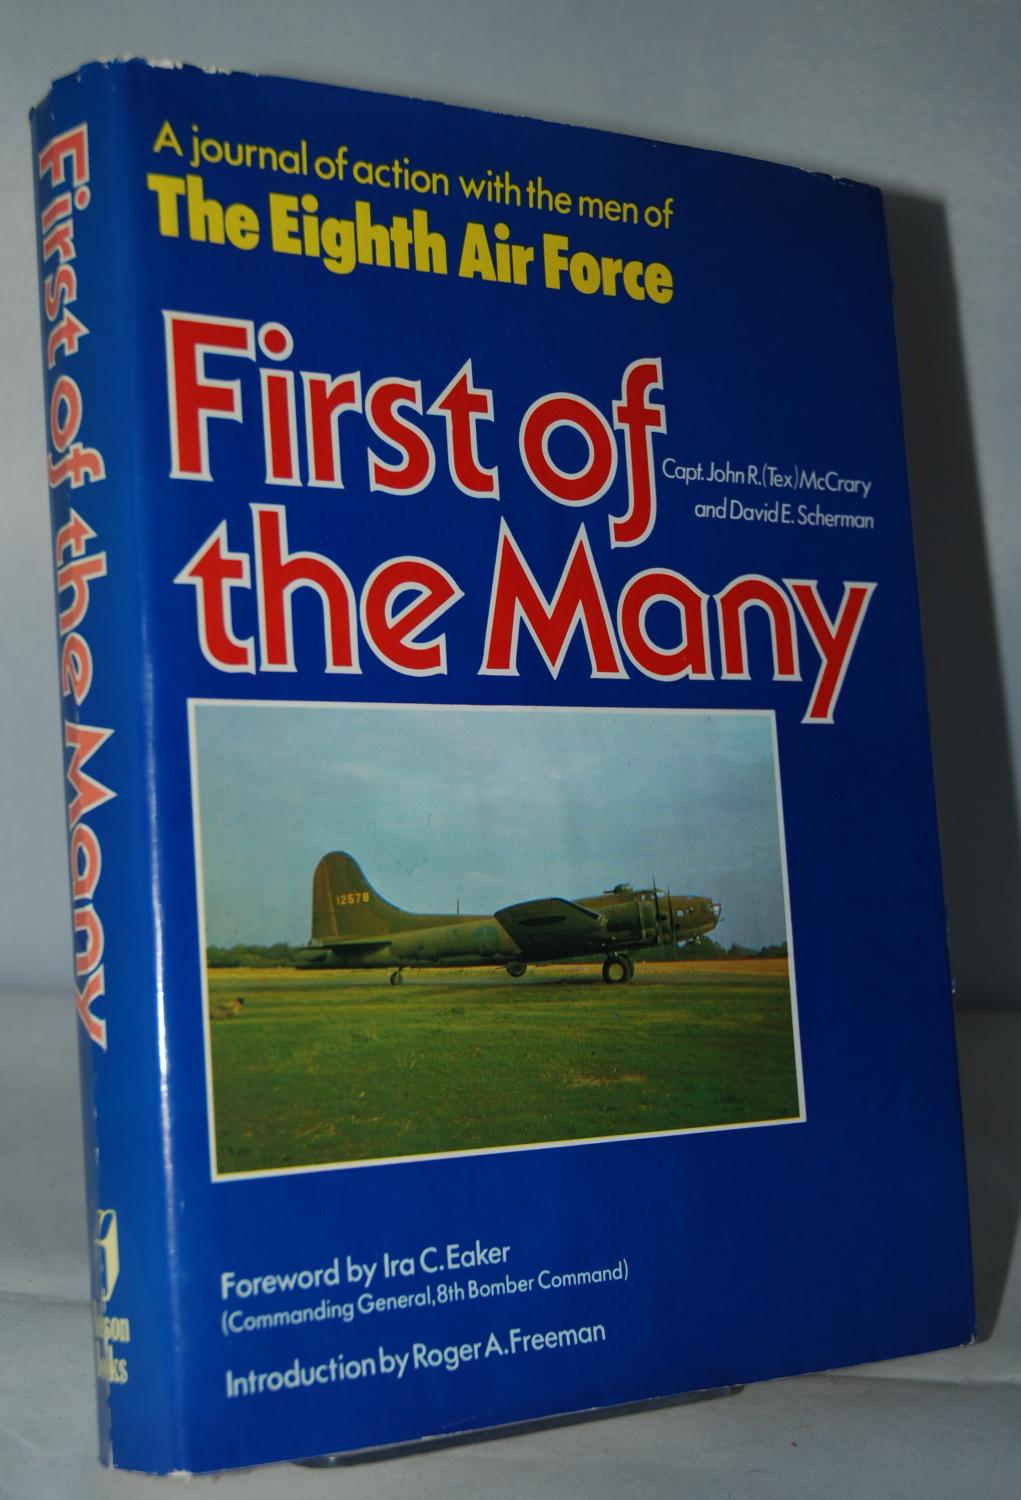 First of the Many Journal of Action with the Men of the Eighth Air Force - McCrary, John R. & David Edward Scherman